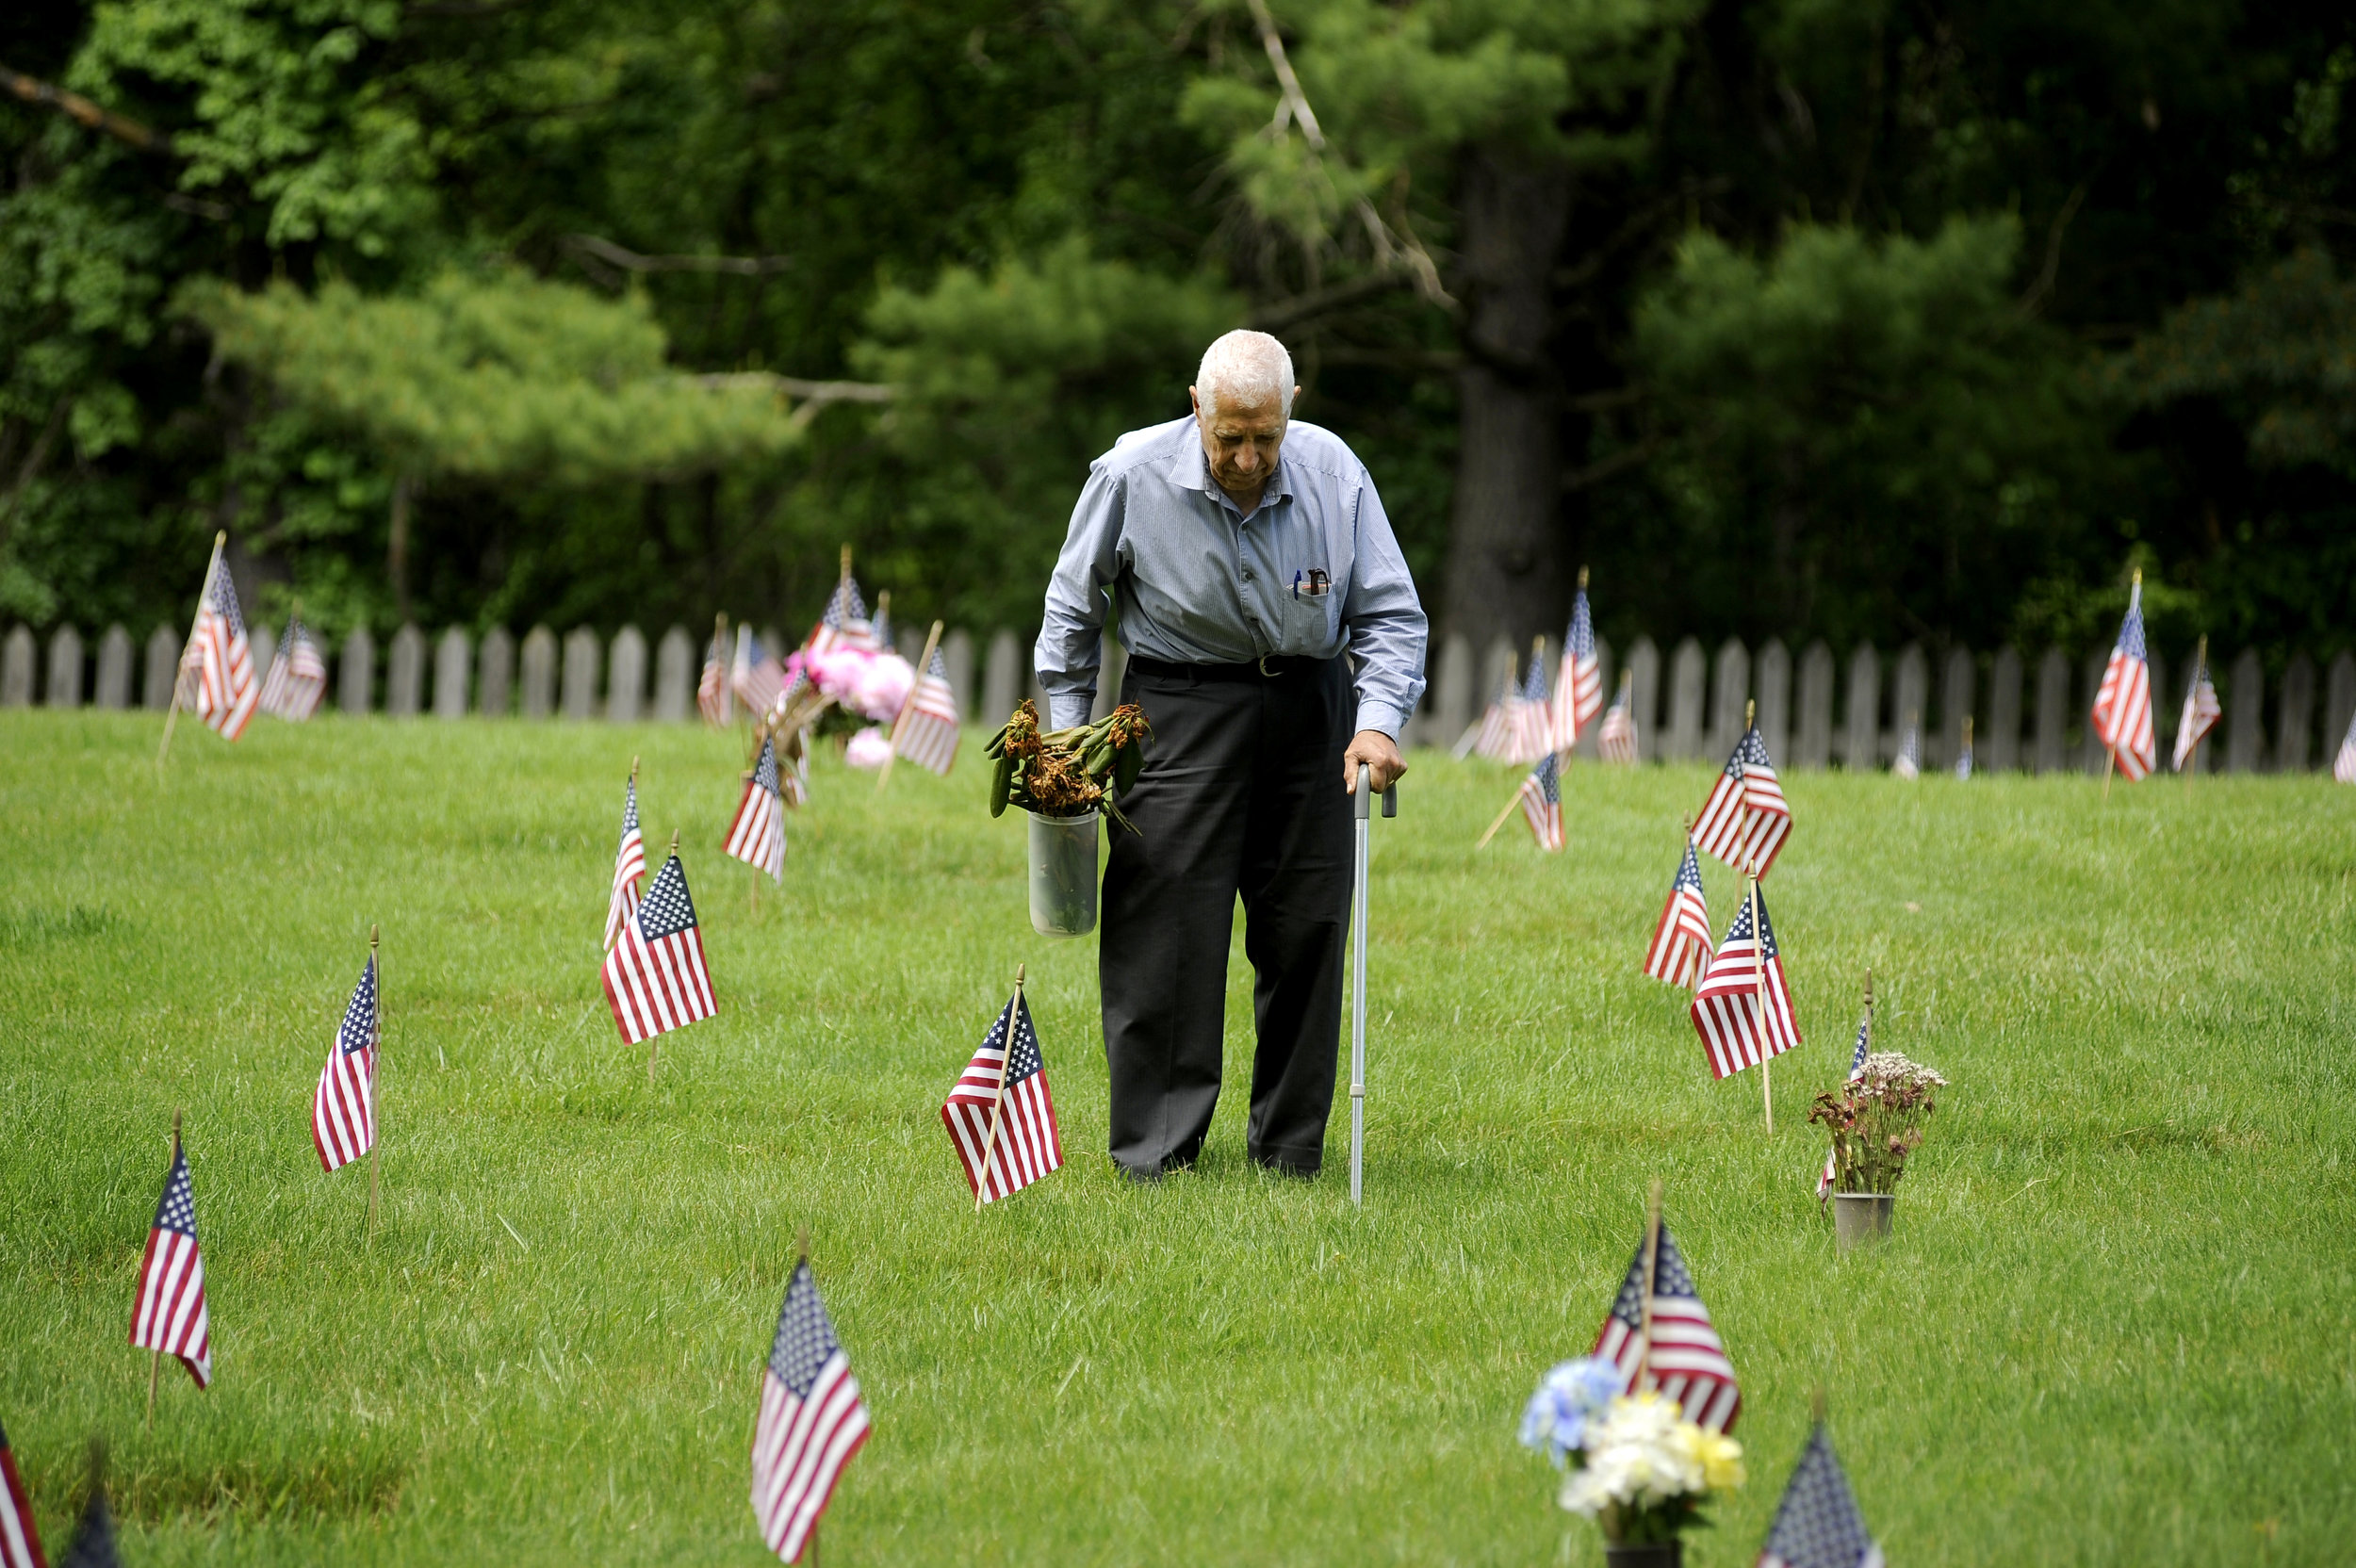   Leo Hindoyan of Towson, Maryland helps to clean up the Dulaney Valley Memorial Gardens in Timonium, Maryland during the Memorial Day ceremonies Monday, May 30, 2016.  